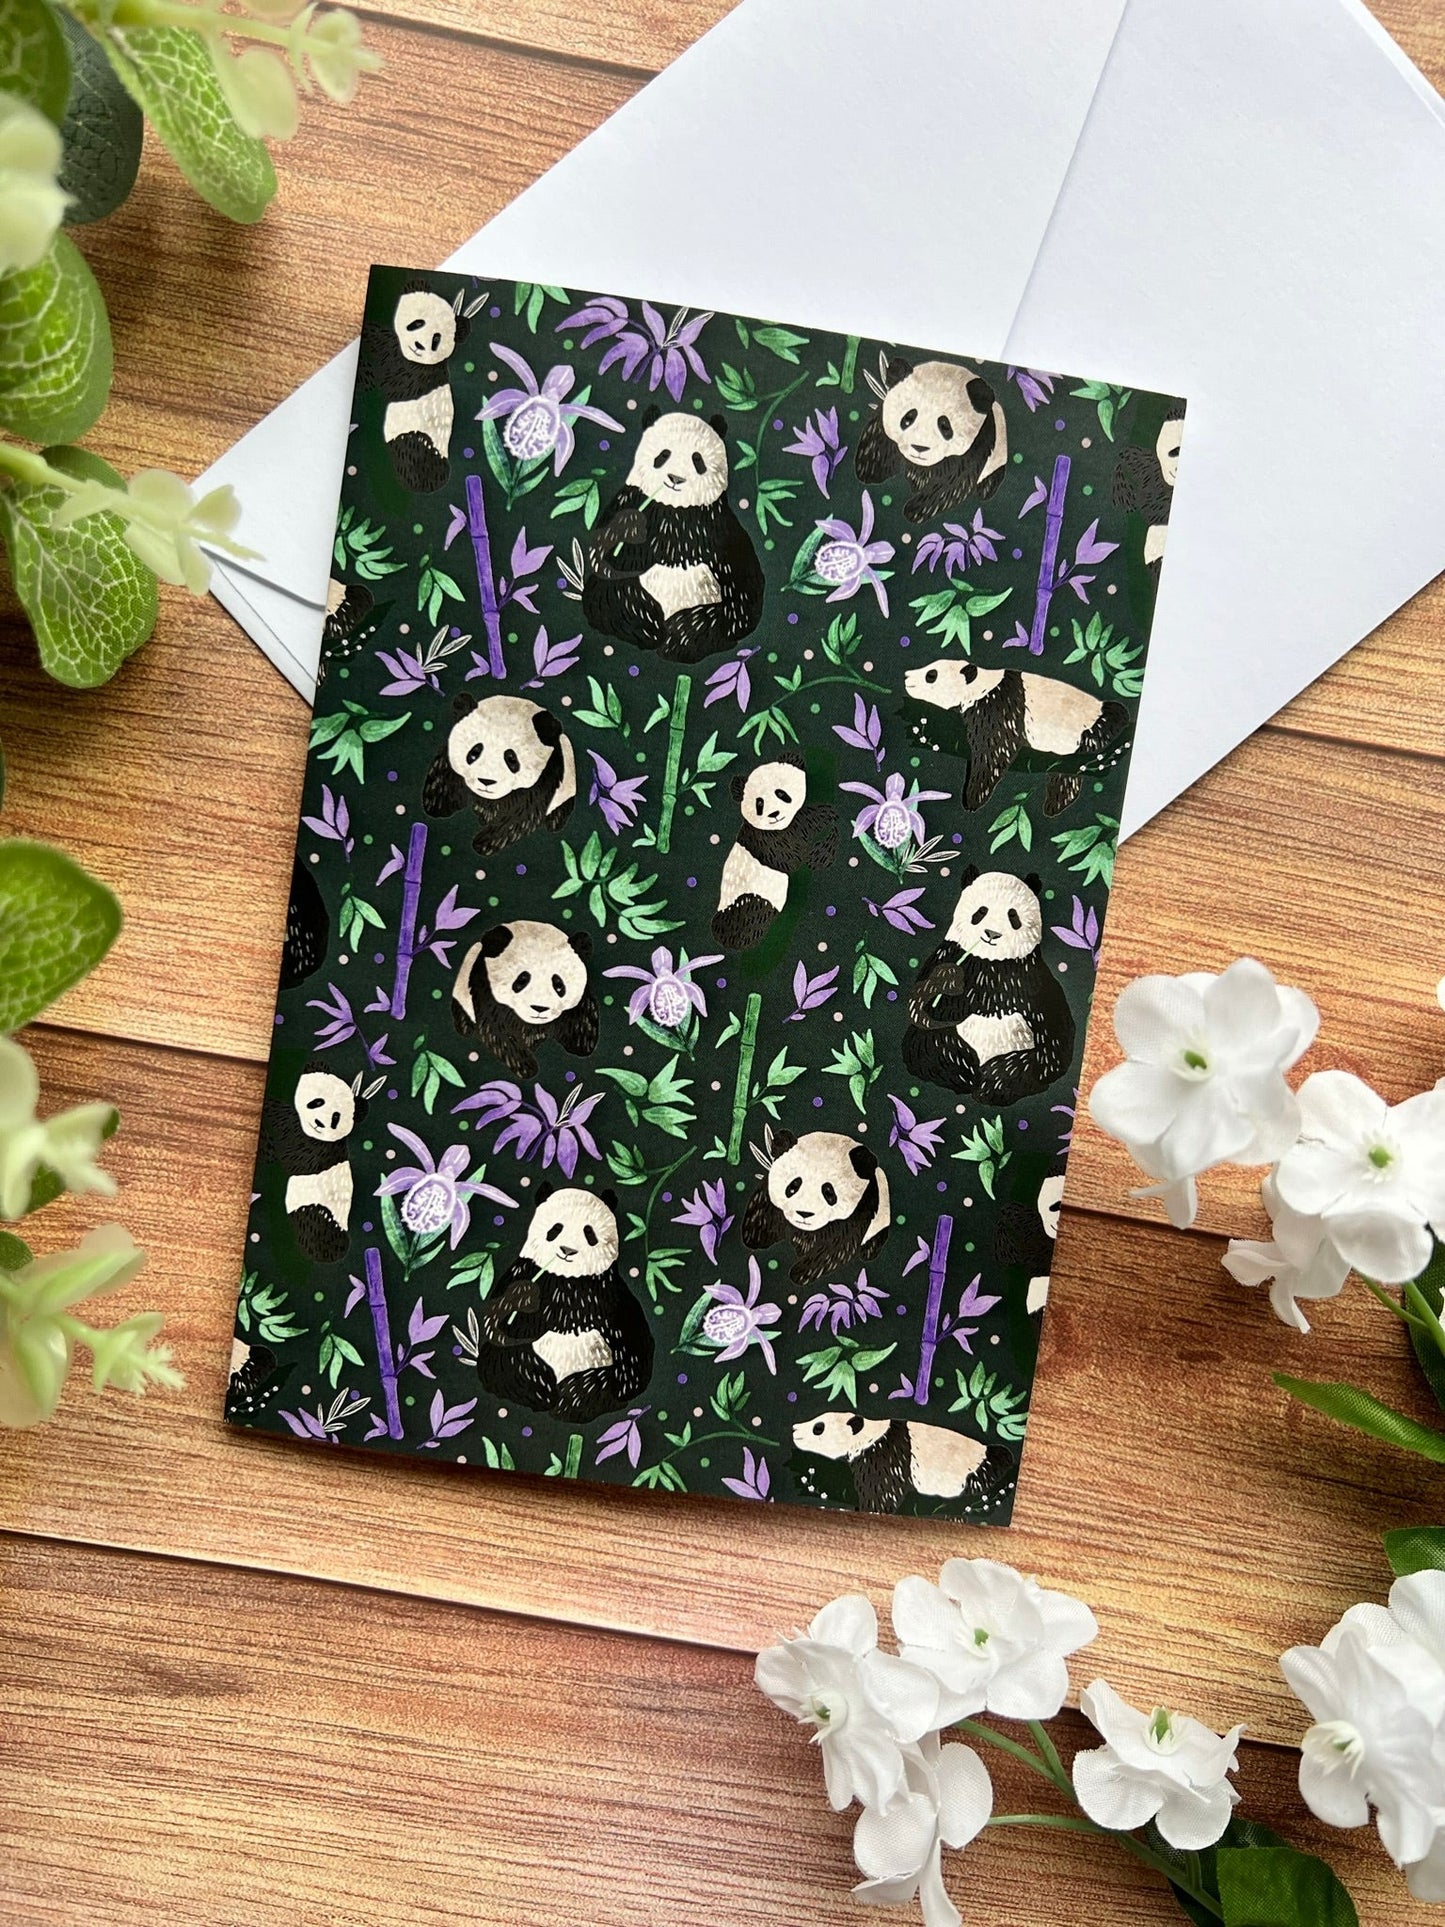 panda greeting card for a panda lover with a white envelope